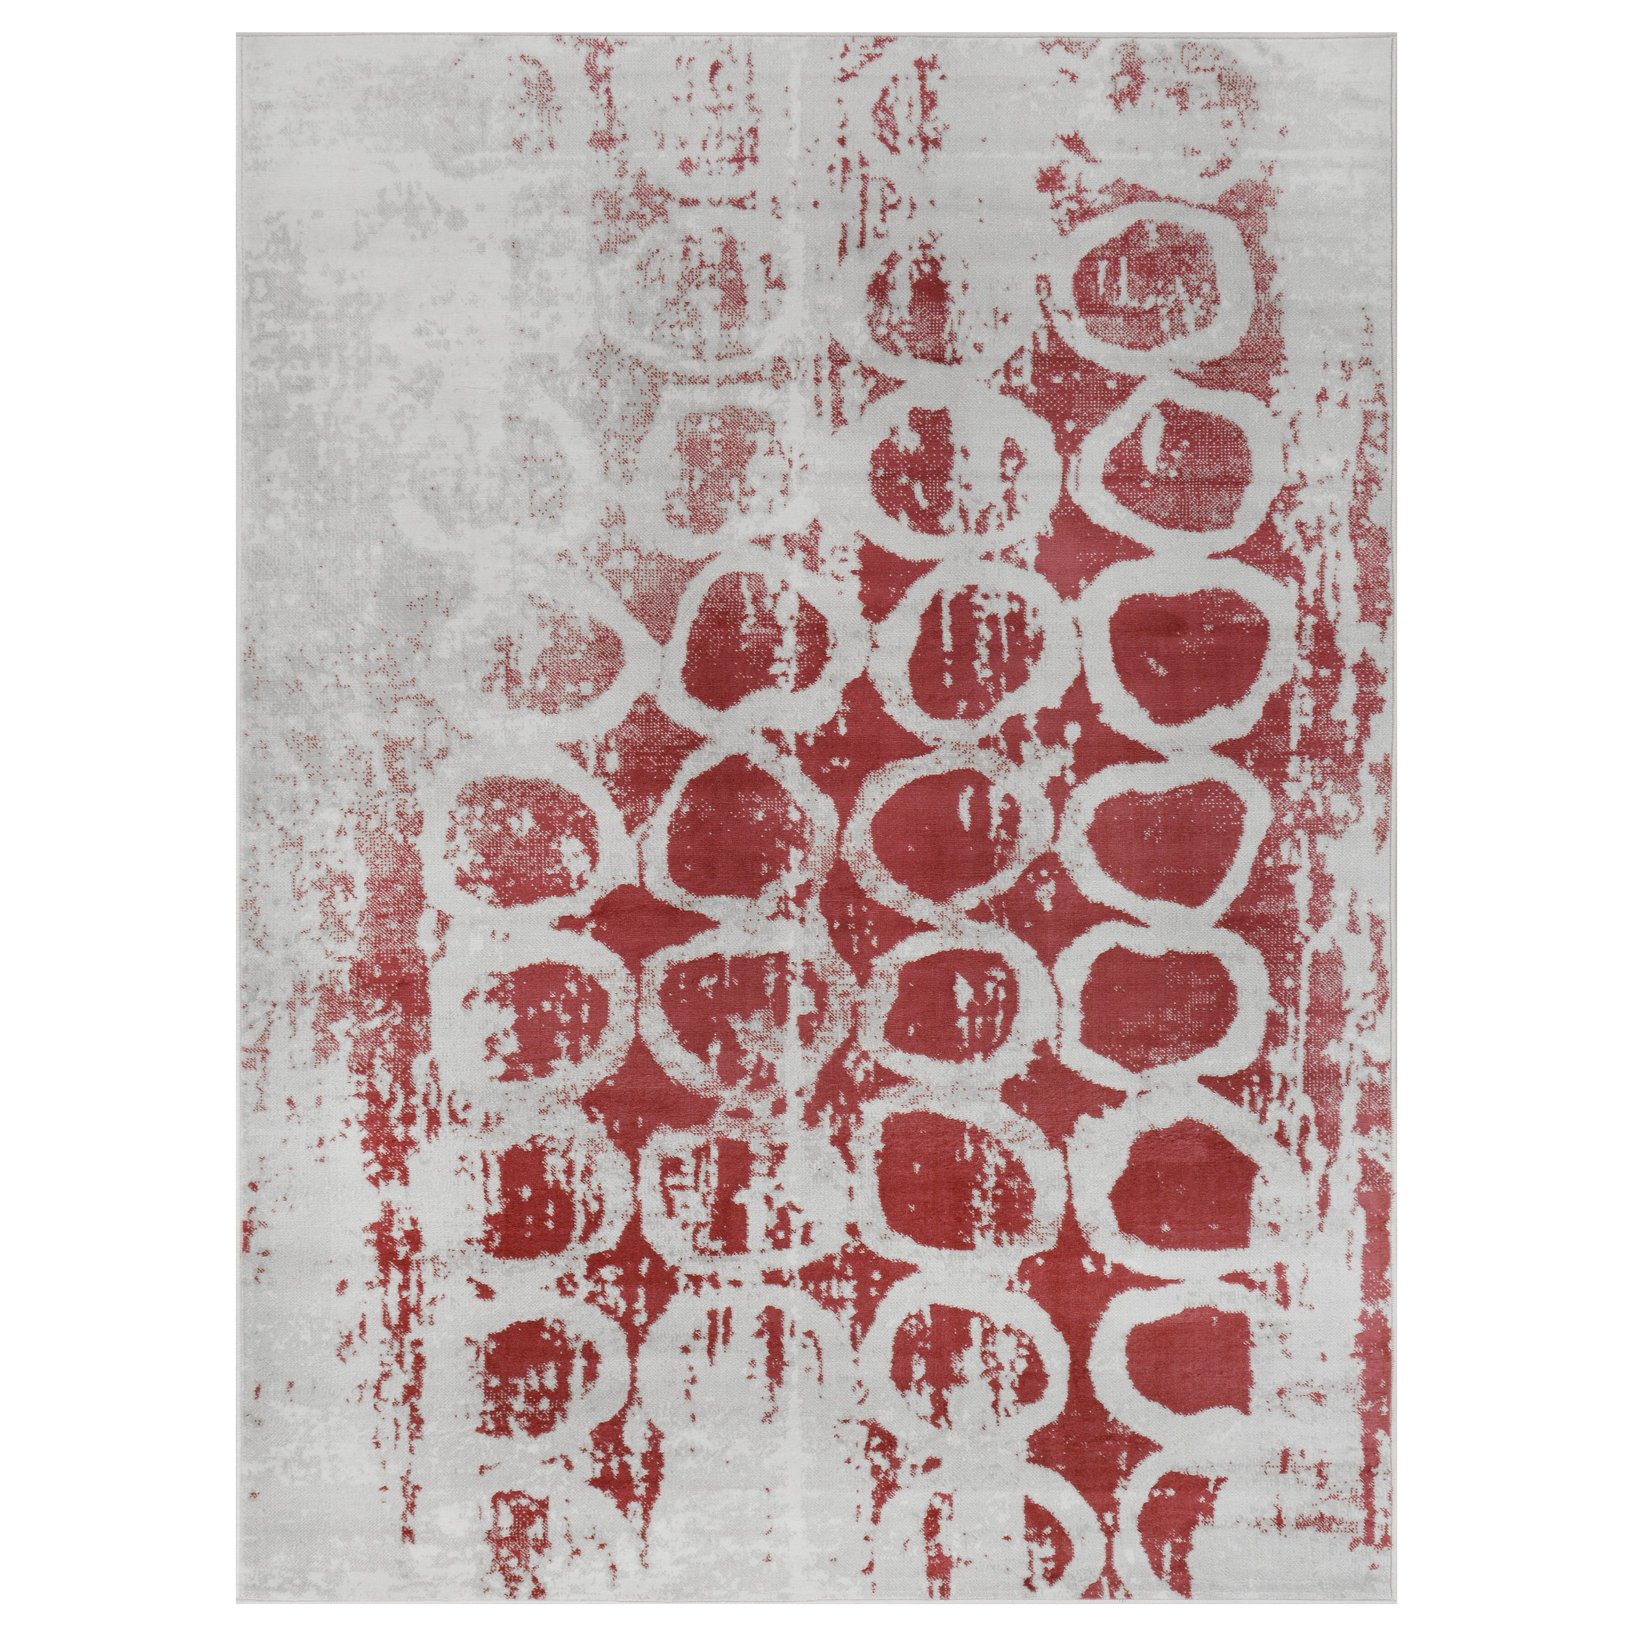 HR red Gray Rug Distressed Area Rug Bohemian Modern Abstract Circle Geometric Printed Contemporary 8x10 Rugs, Cherry red Carpet - image 2 of 8